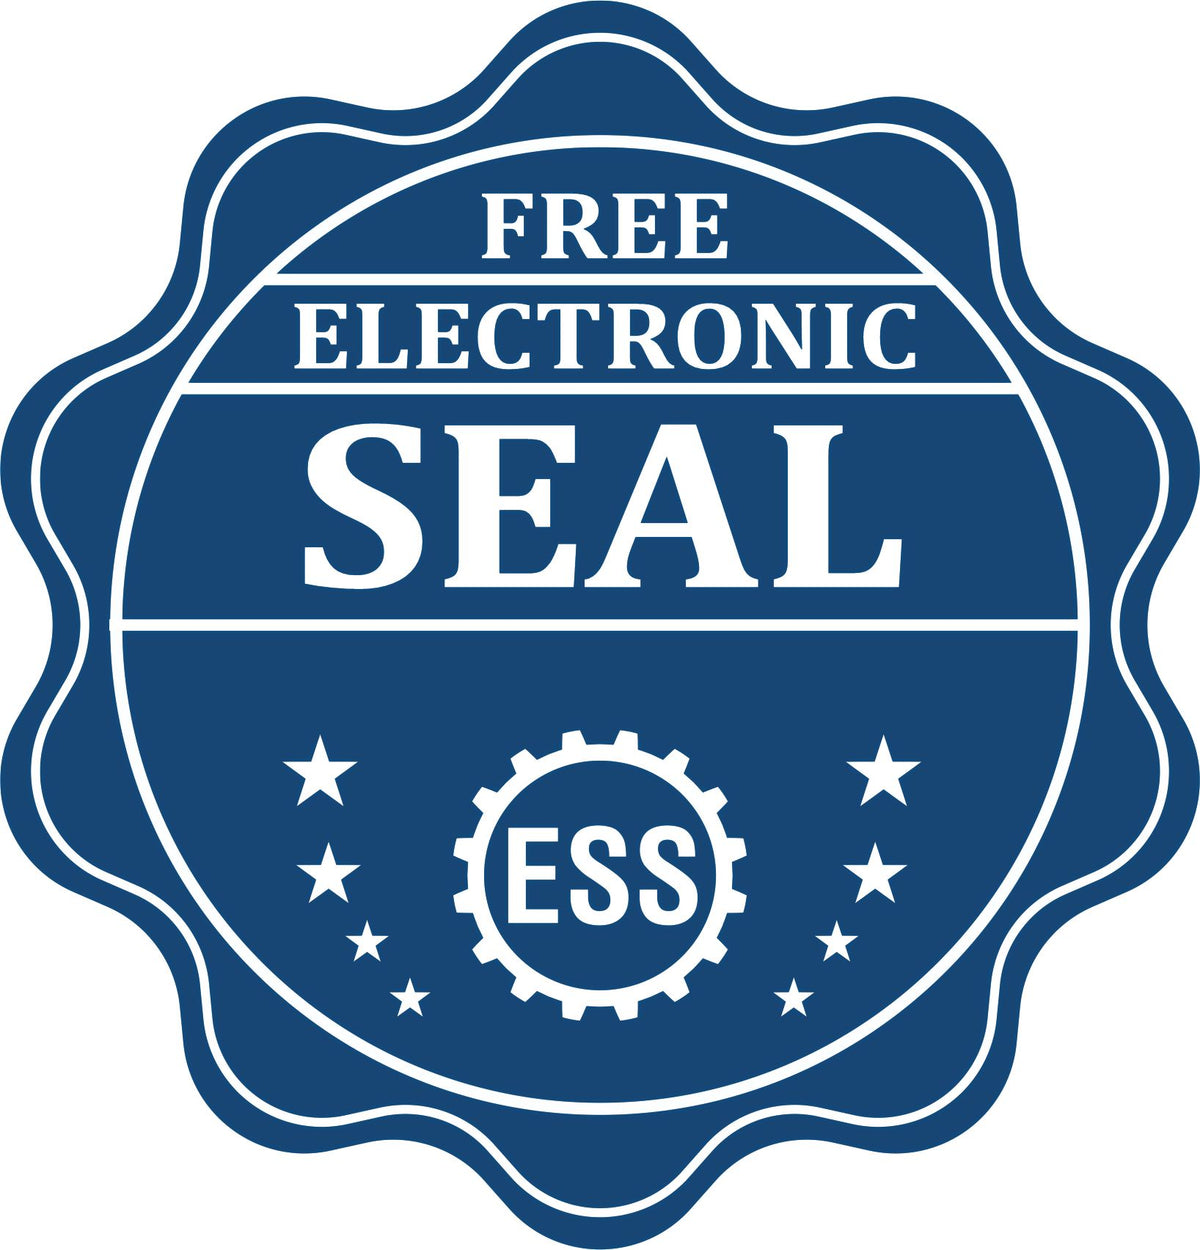 A badge showing a free electronic seal for the Long Reach Washington PE Seal with stars and the ESS gear on the emblem.